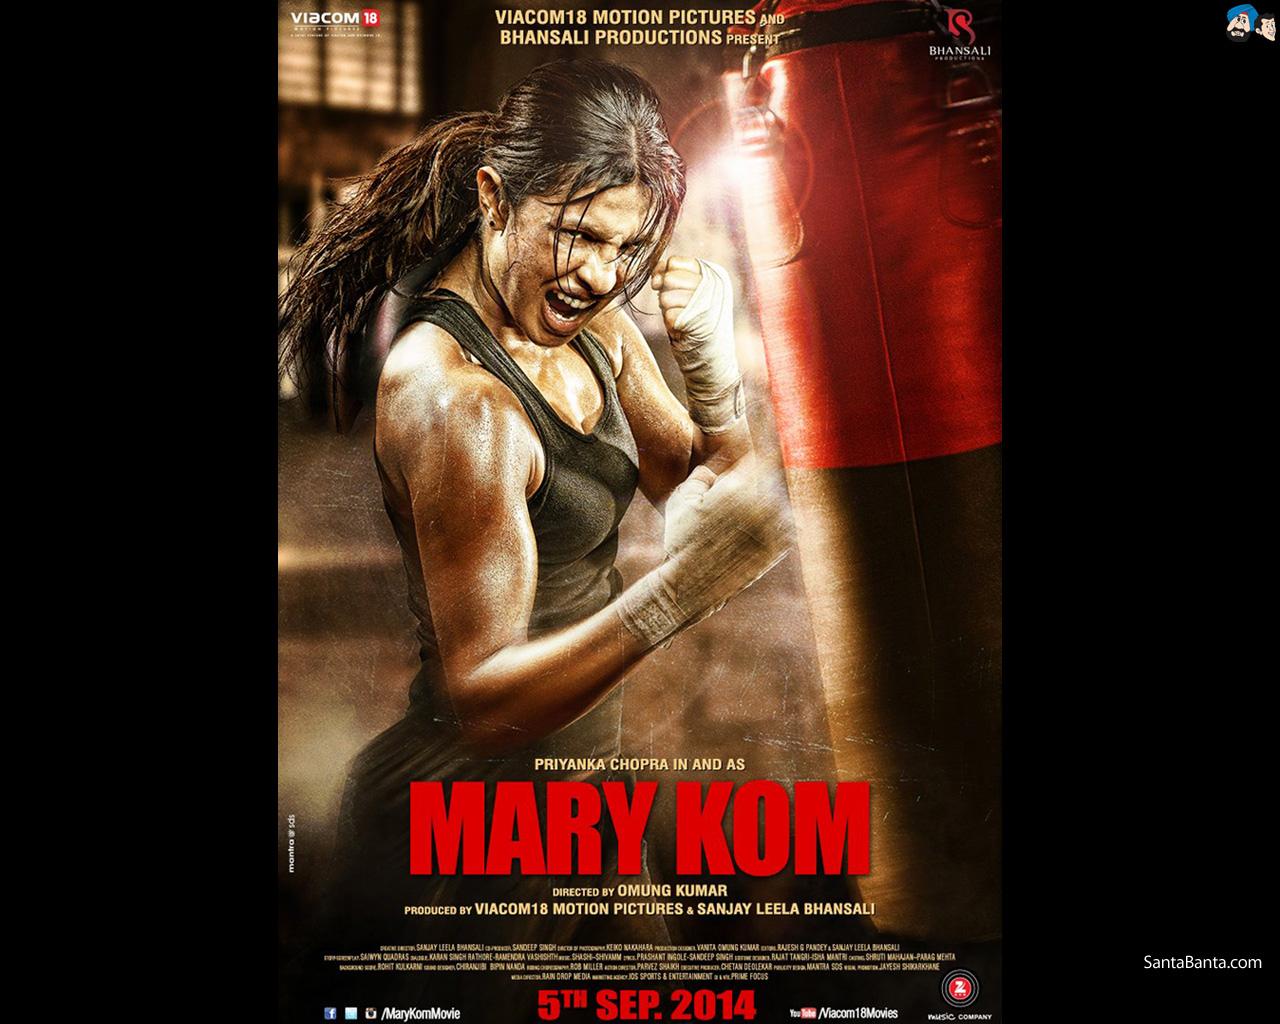 Mary Kom: Priyanka Chopra who had earlier played glamorous and girl-next-door roles in her past films, stepped into the shoes of Olympic medalist boxer Mary Kom. She trained hard to build muscles over a period of time to look like the athlete and sink her teeth into the role. The Omung Kumar directorial fared decently at the Box Office.